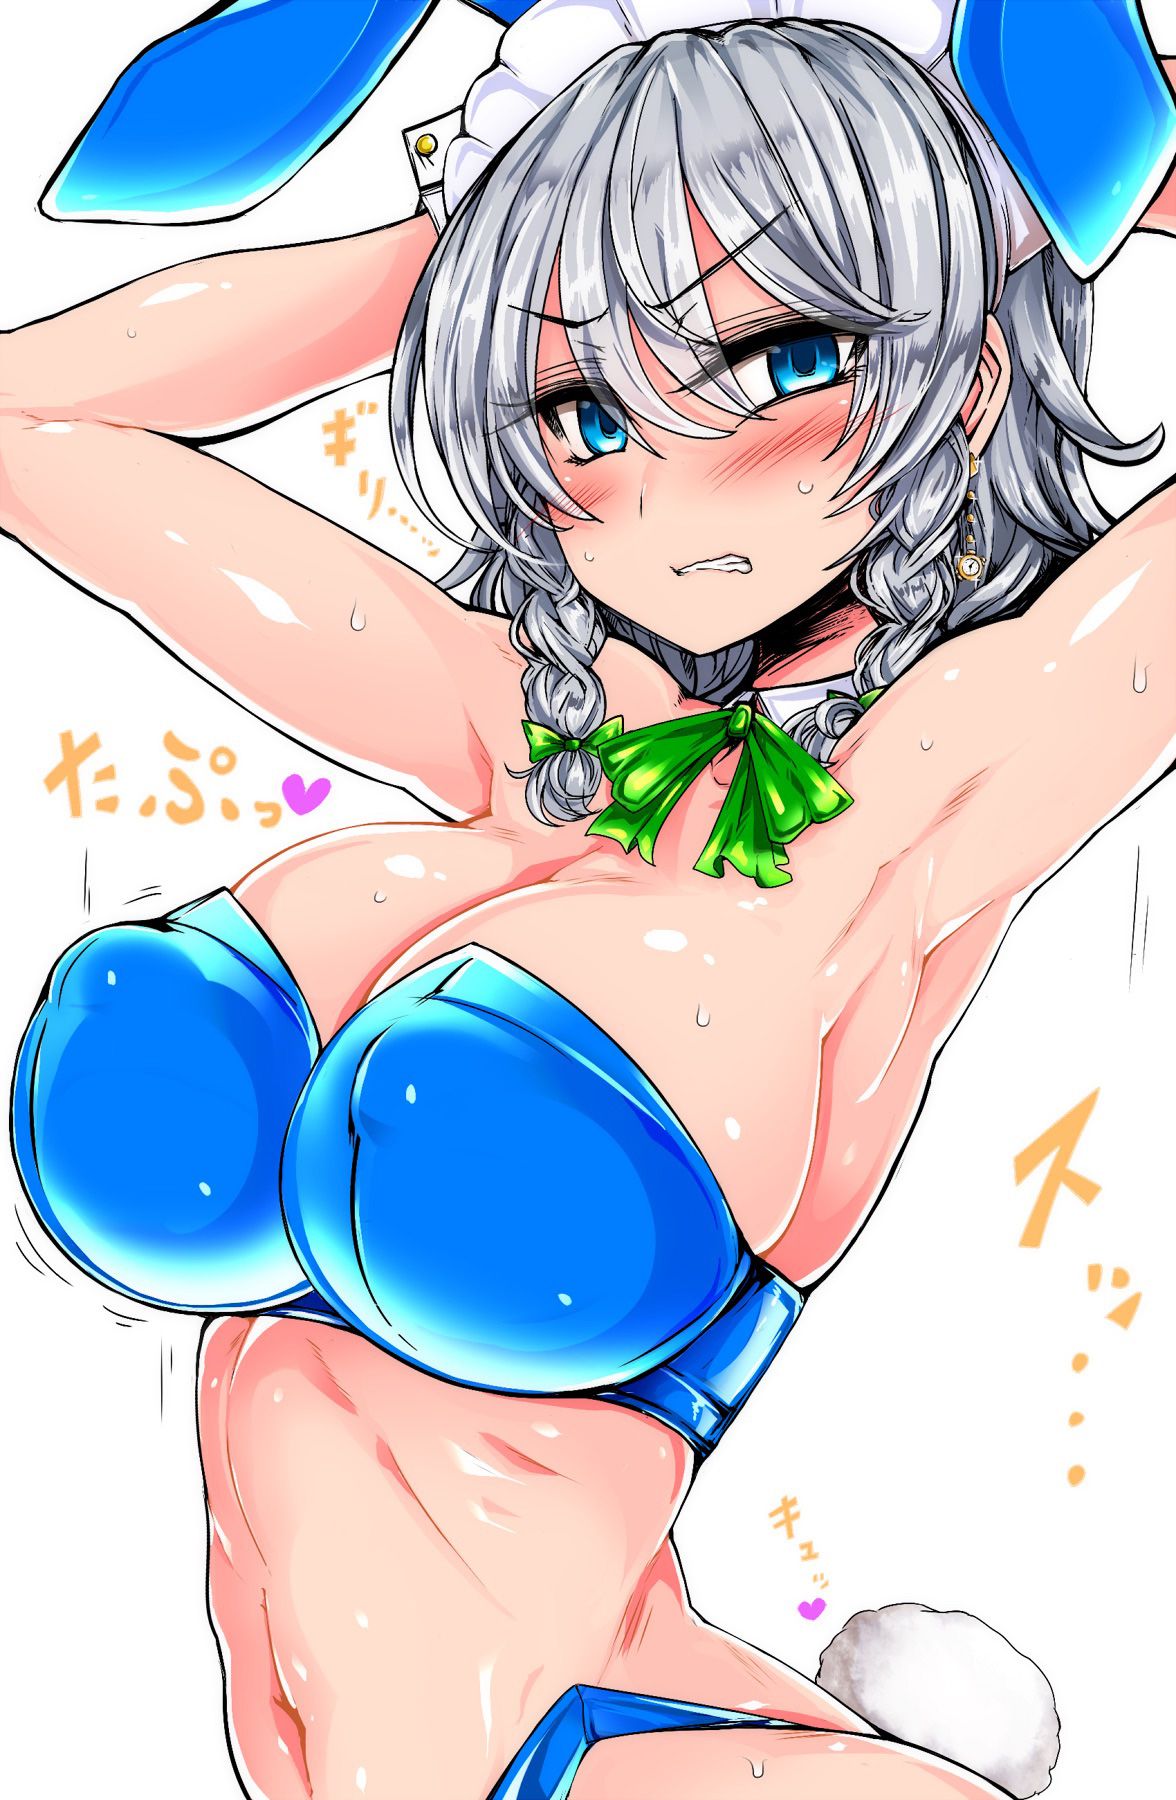 [Touhou] Secondary erotic images of female characters 3 70 photos 37